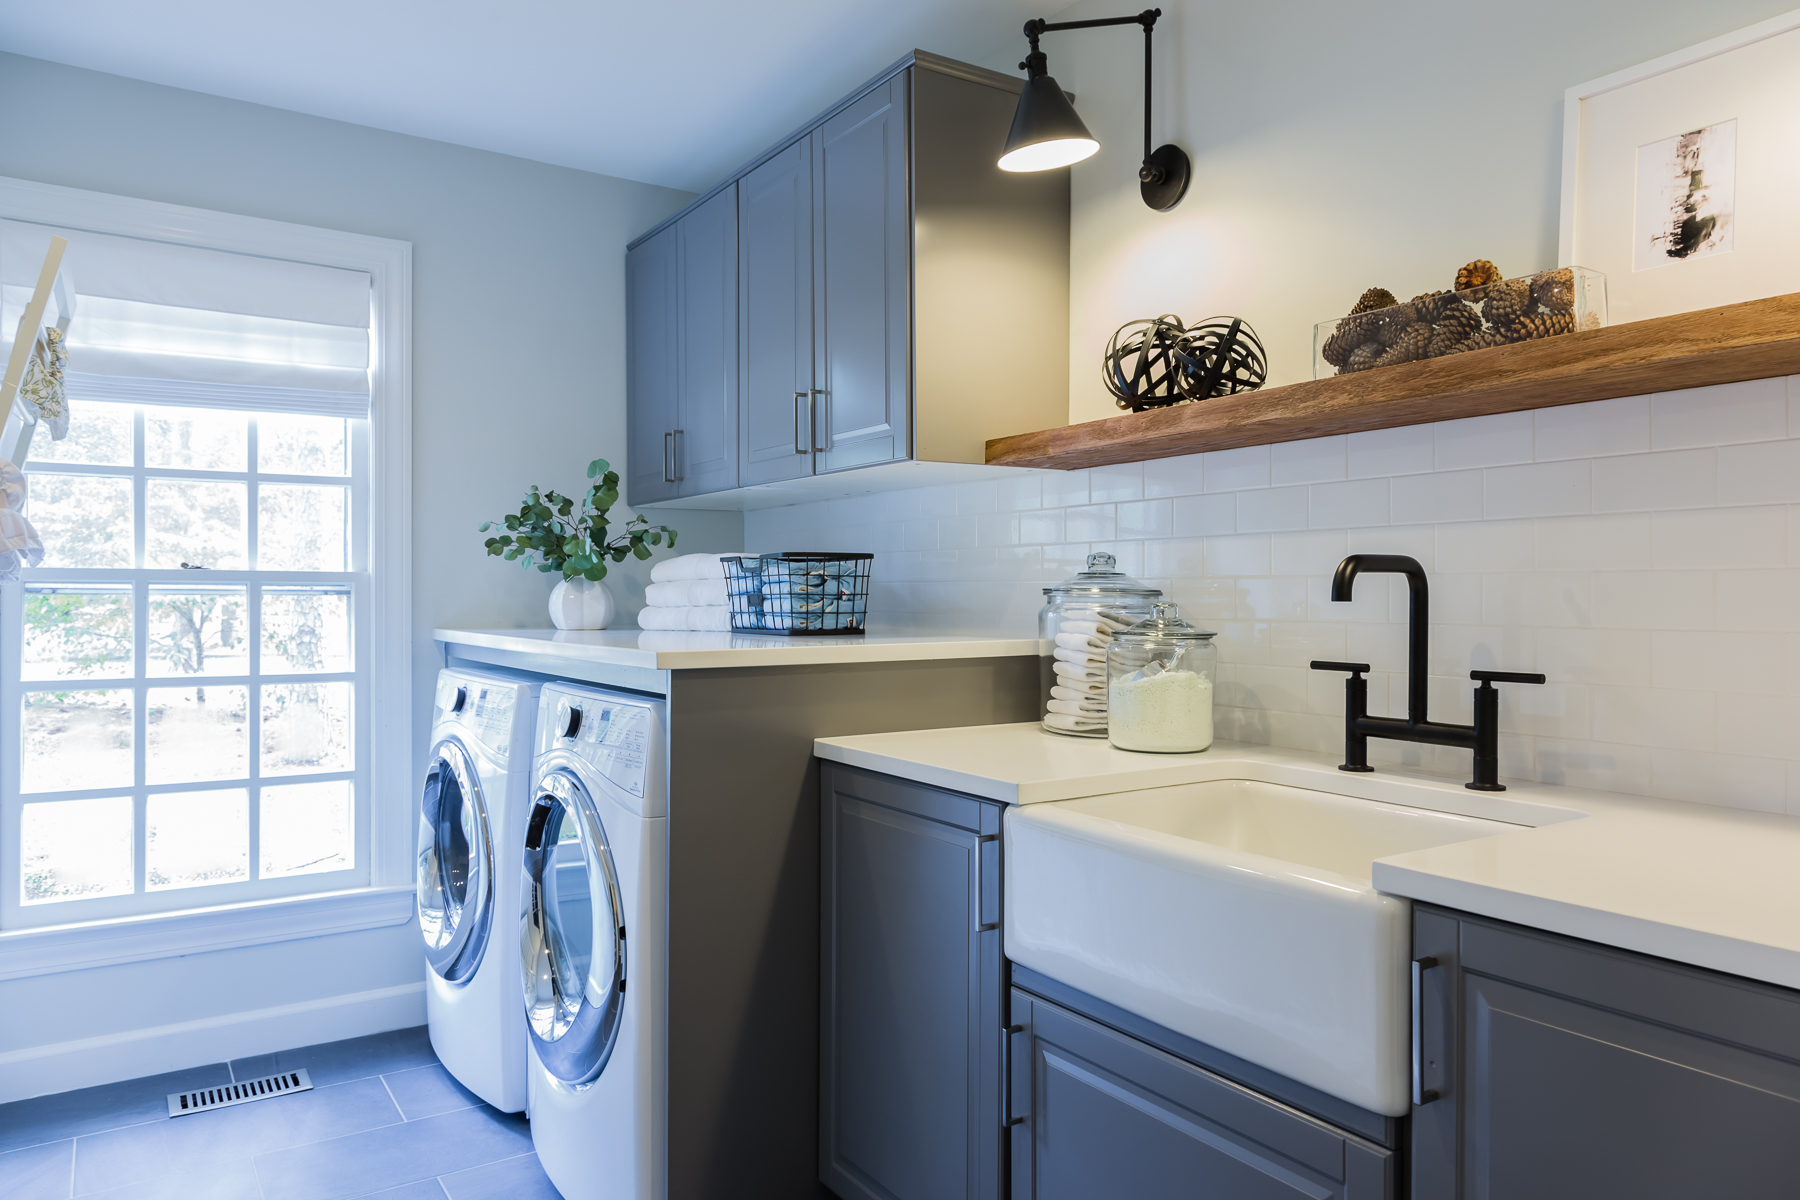 Light-filled laundry room with farmhouse sink and wood open shelving.